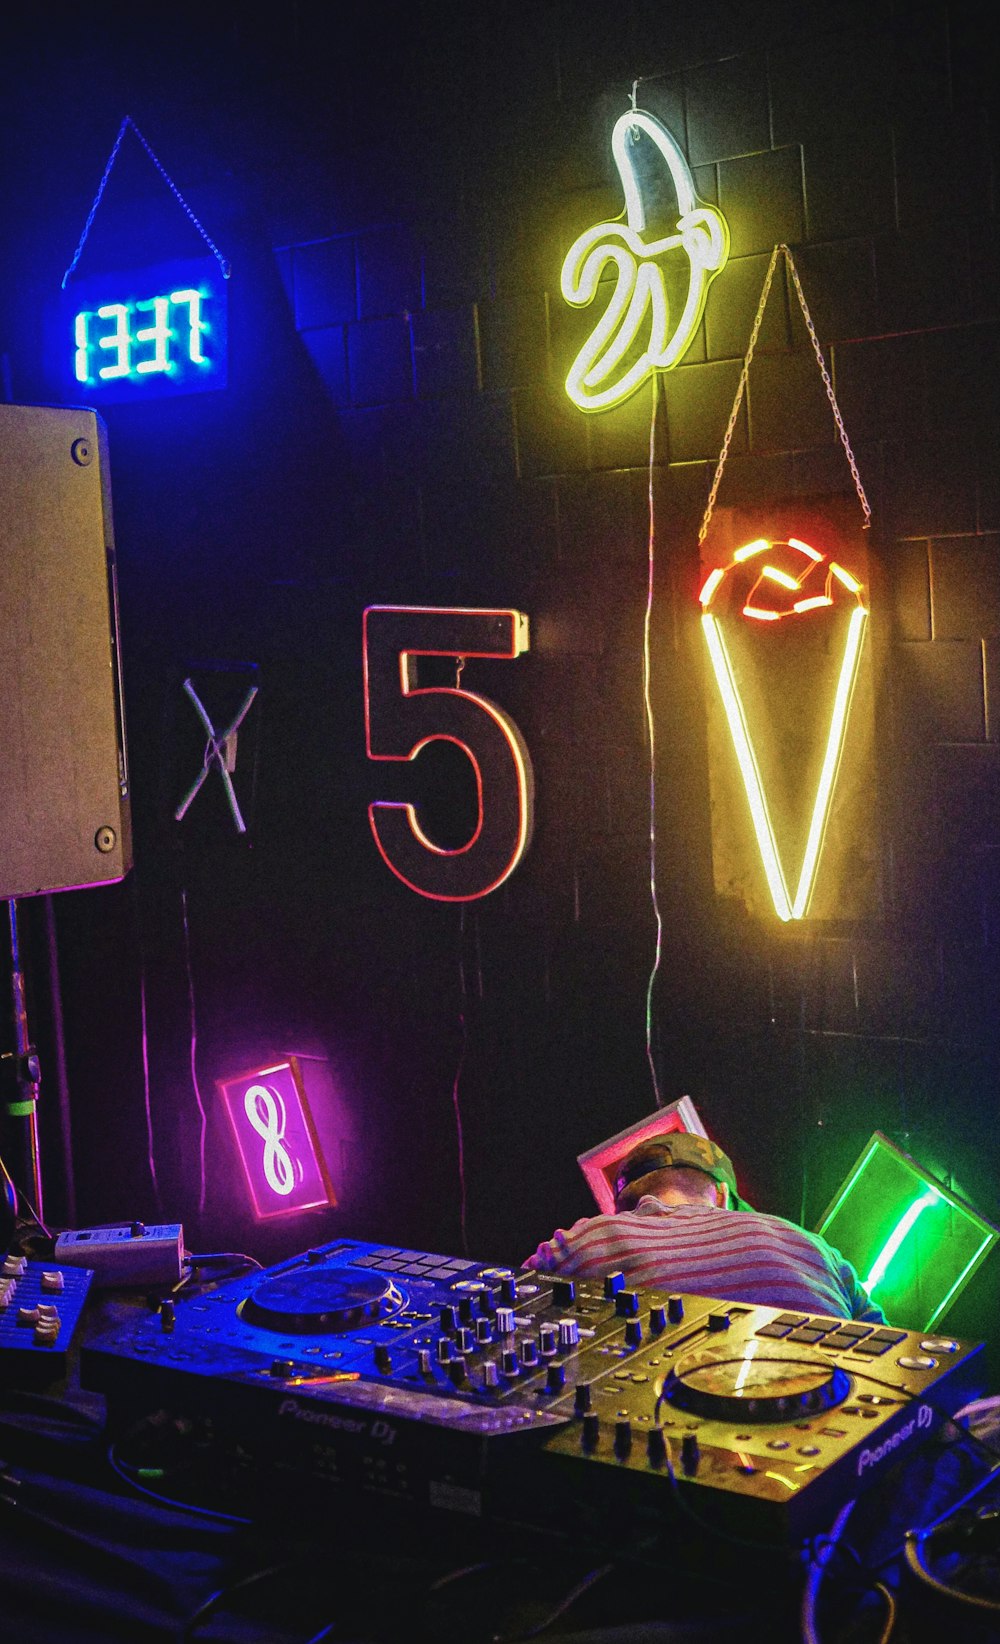 a dj booth with neon signs and dj equipment